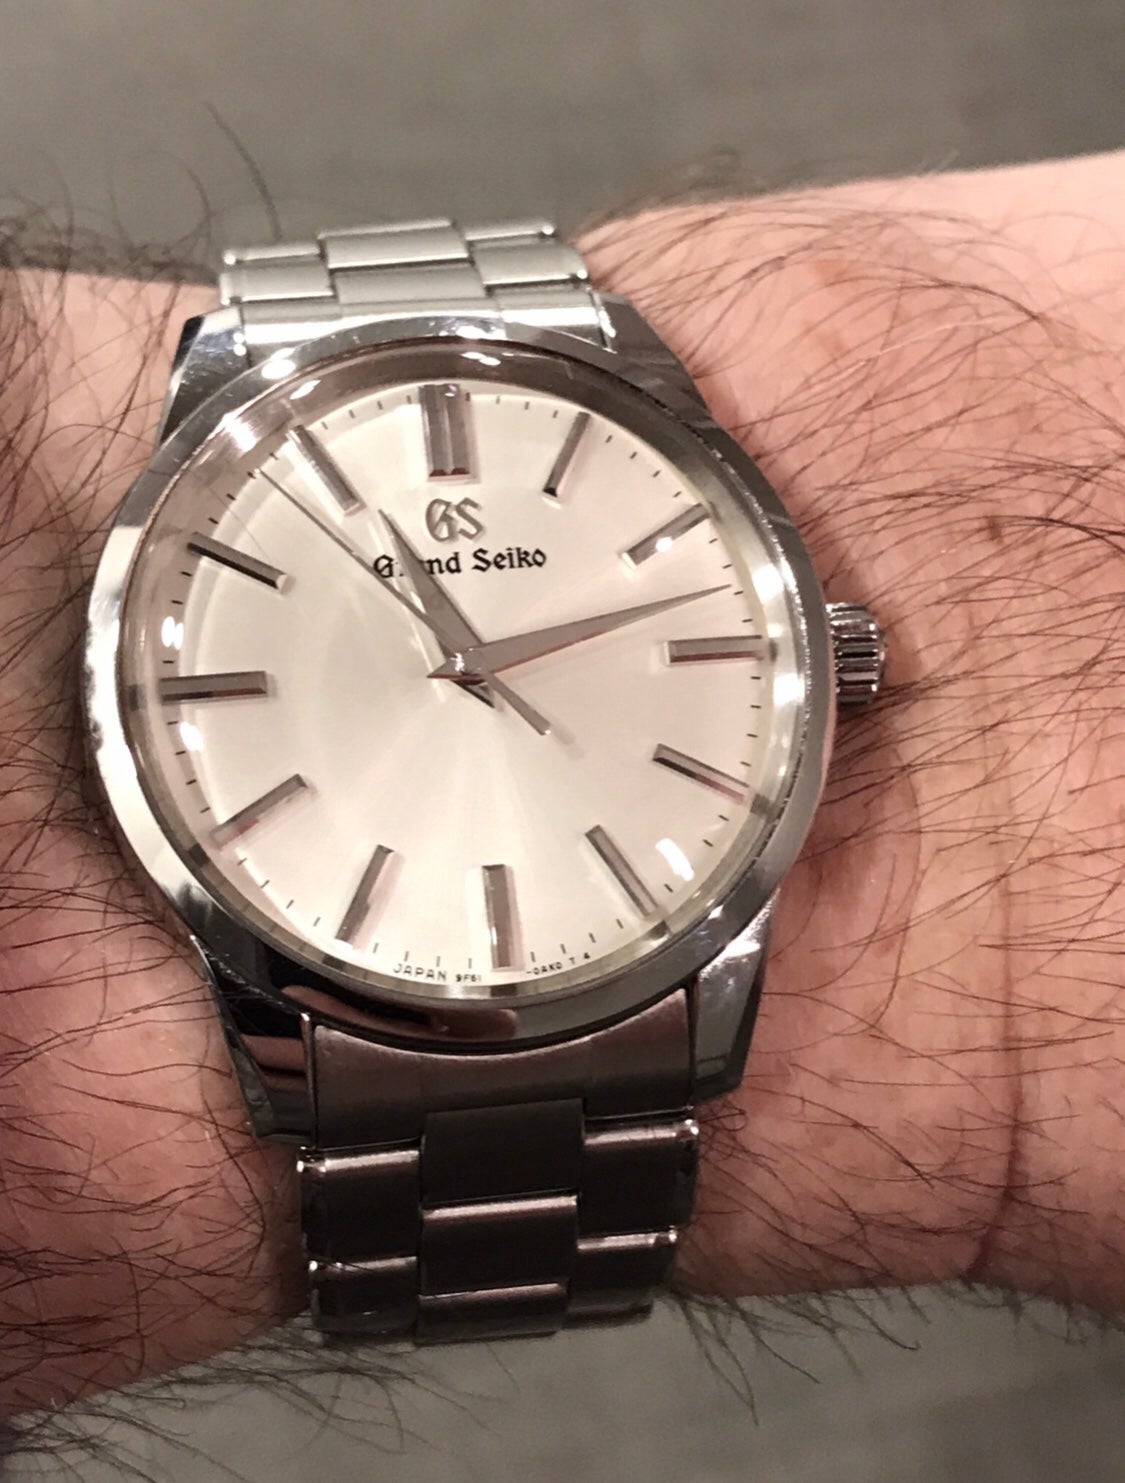 Review of the Grand Seiko SBGX319 | Page 2 | WatchUSeek Watch Forums